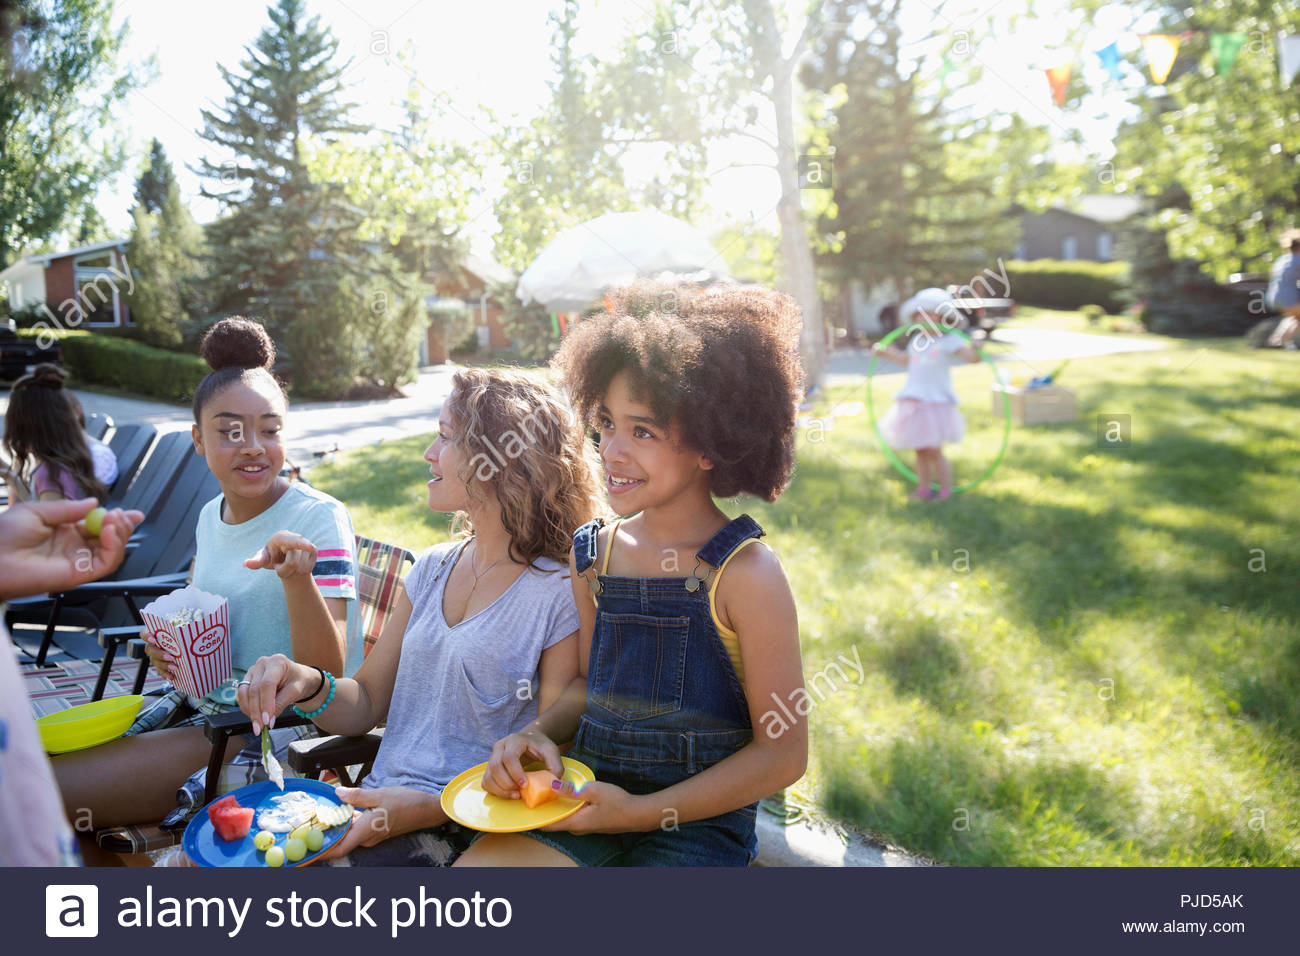 Neighbors eating at summer neighborhood block party in sunny park Stock